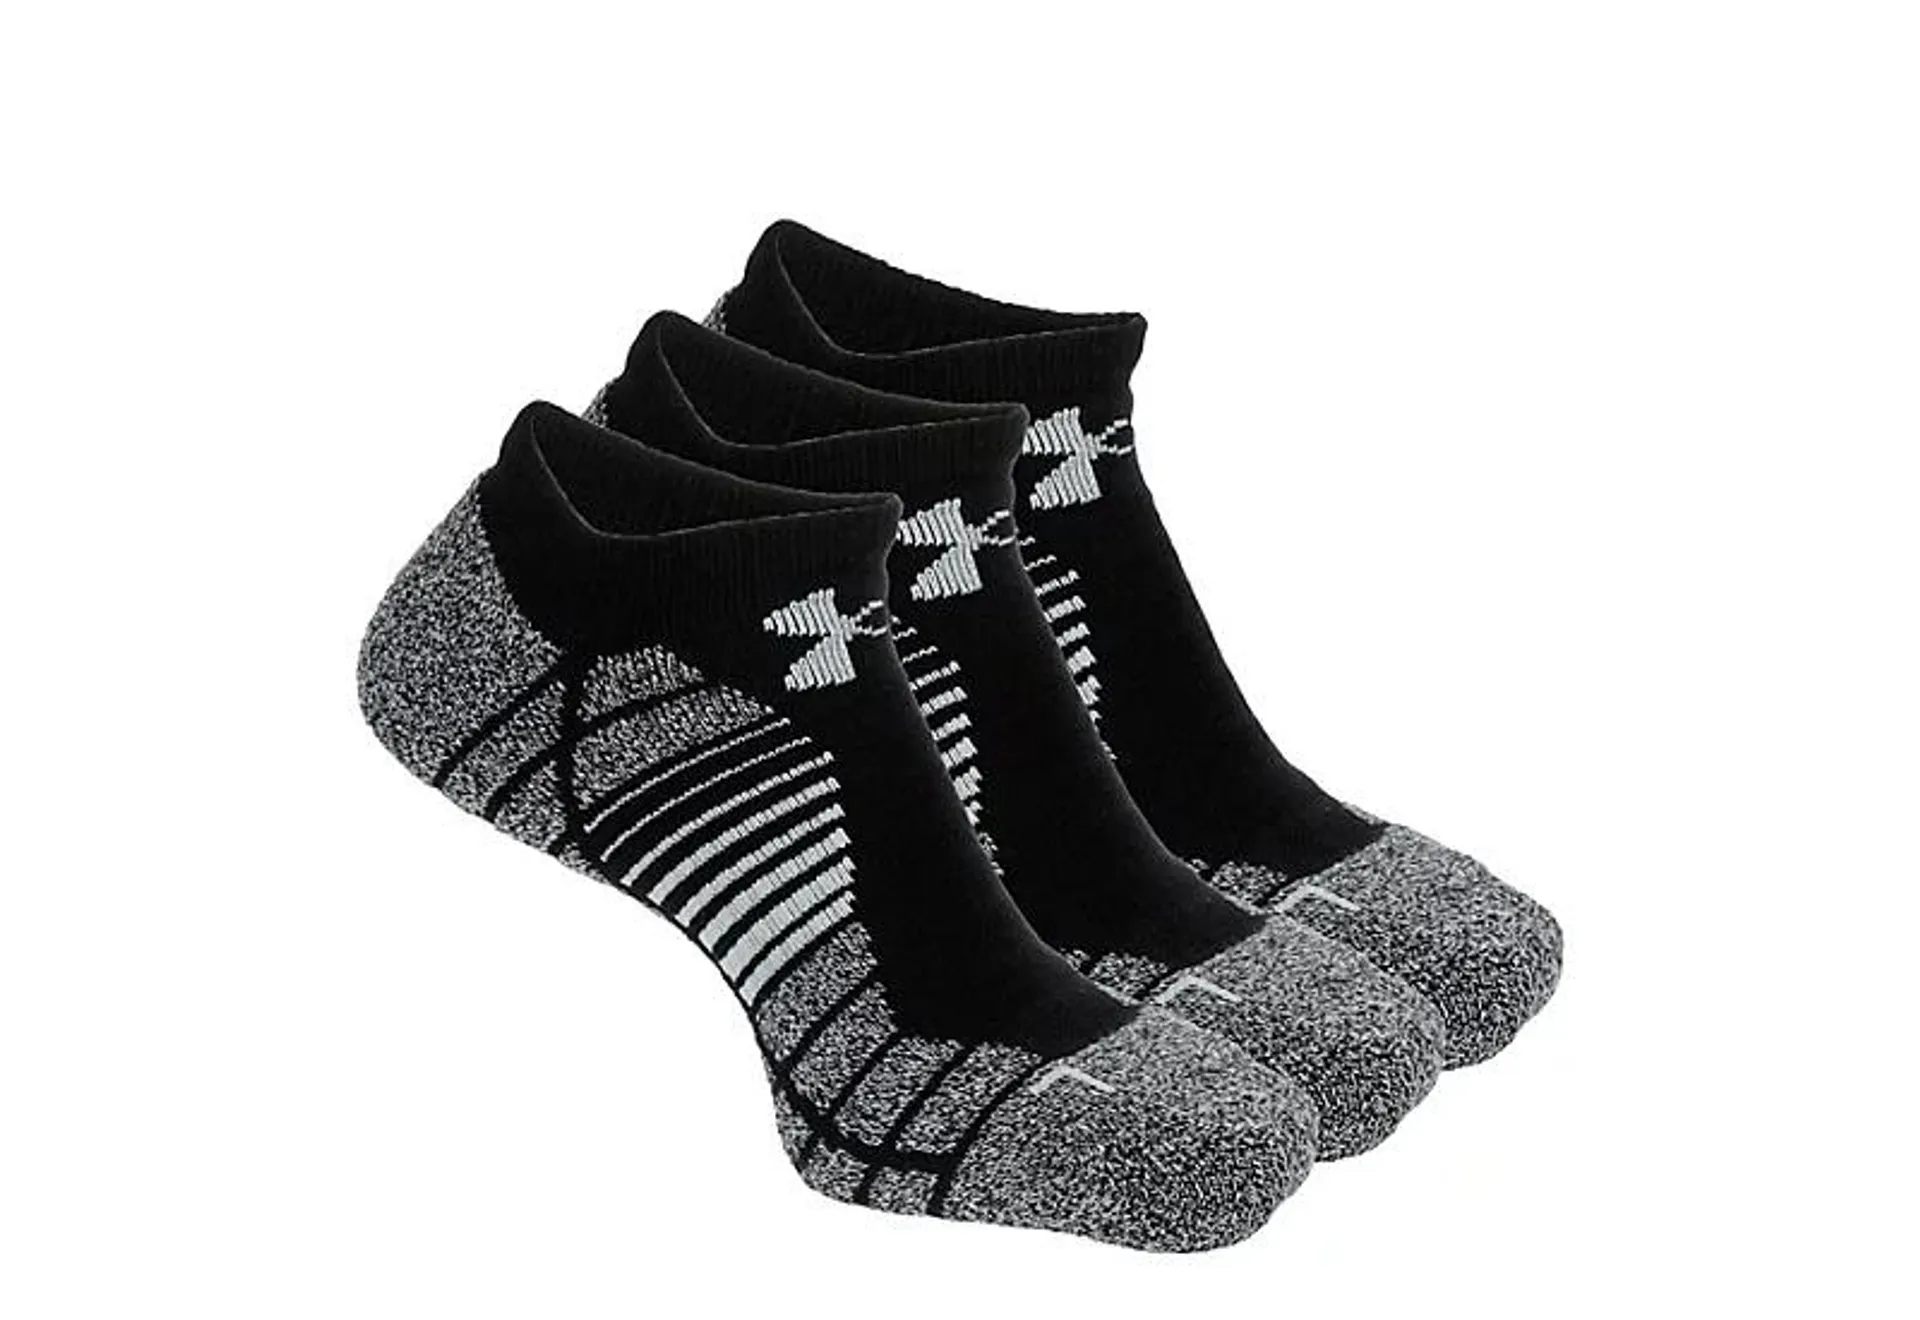 Under Armour Mens Elevated Performance No Show Socks 3 Pairs - Black